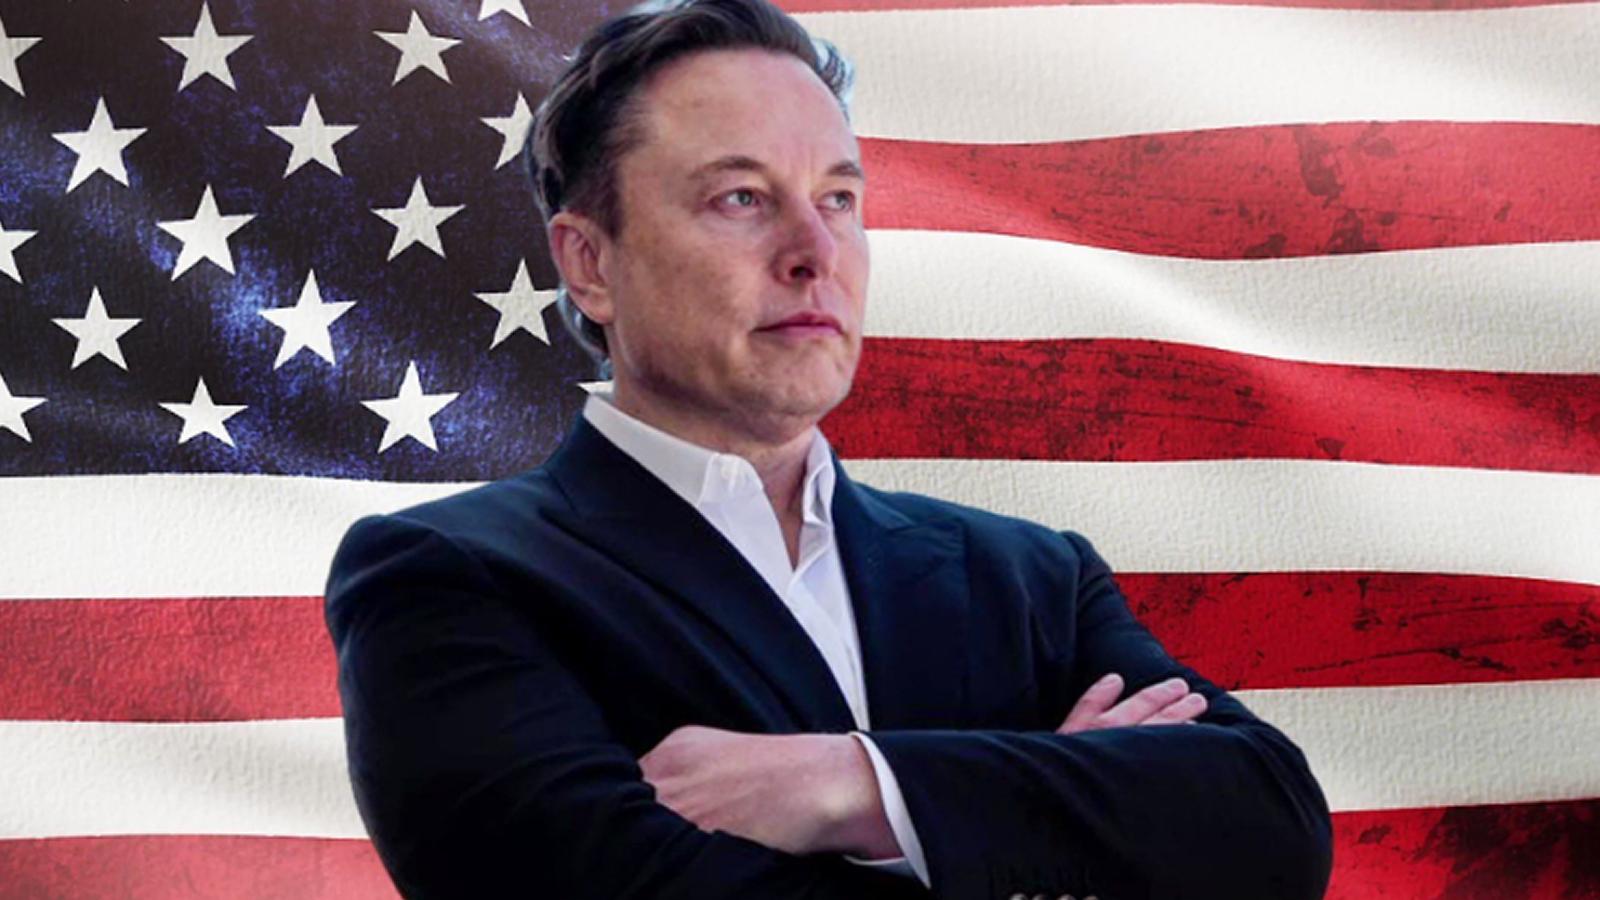 Elon Musk in front of the US flag.